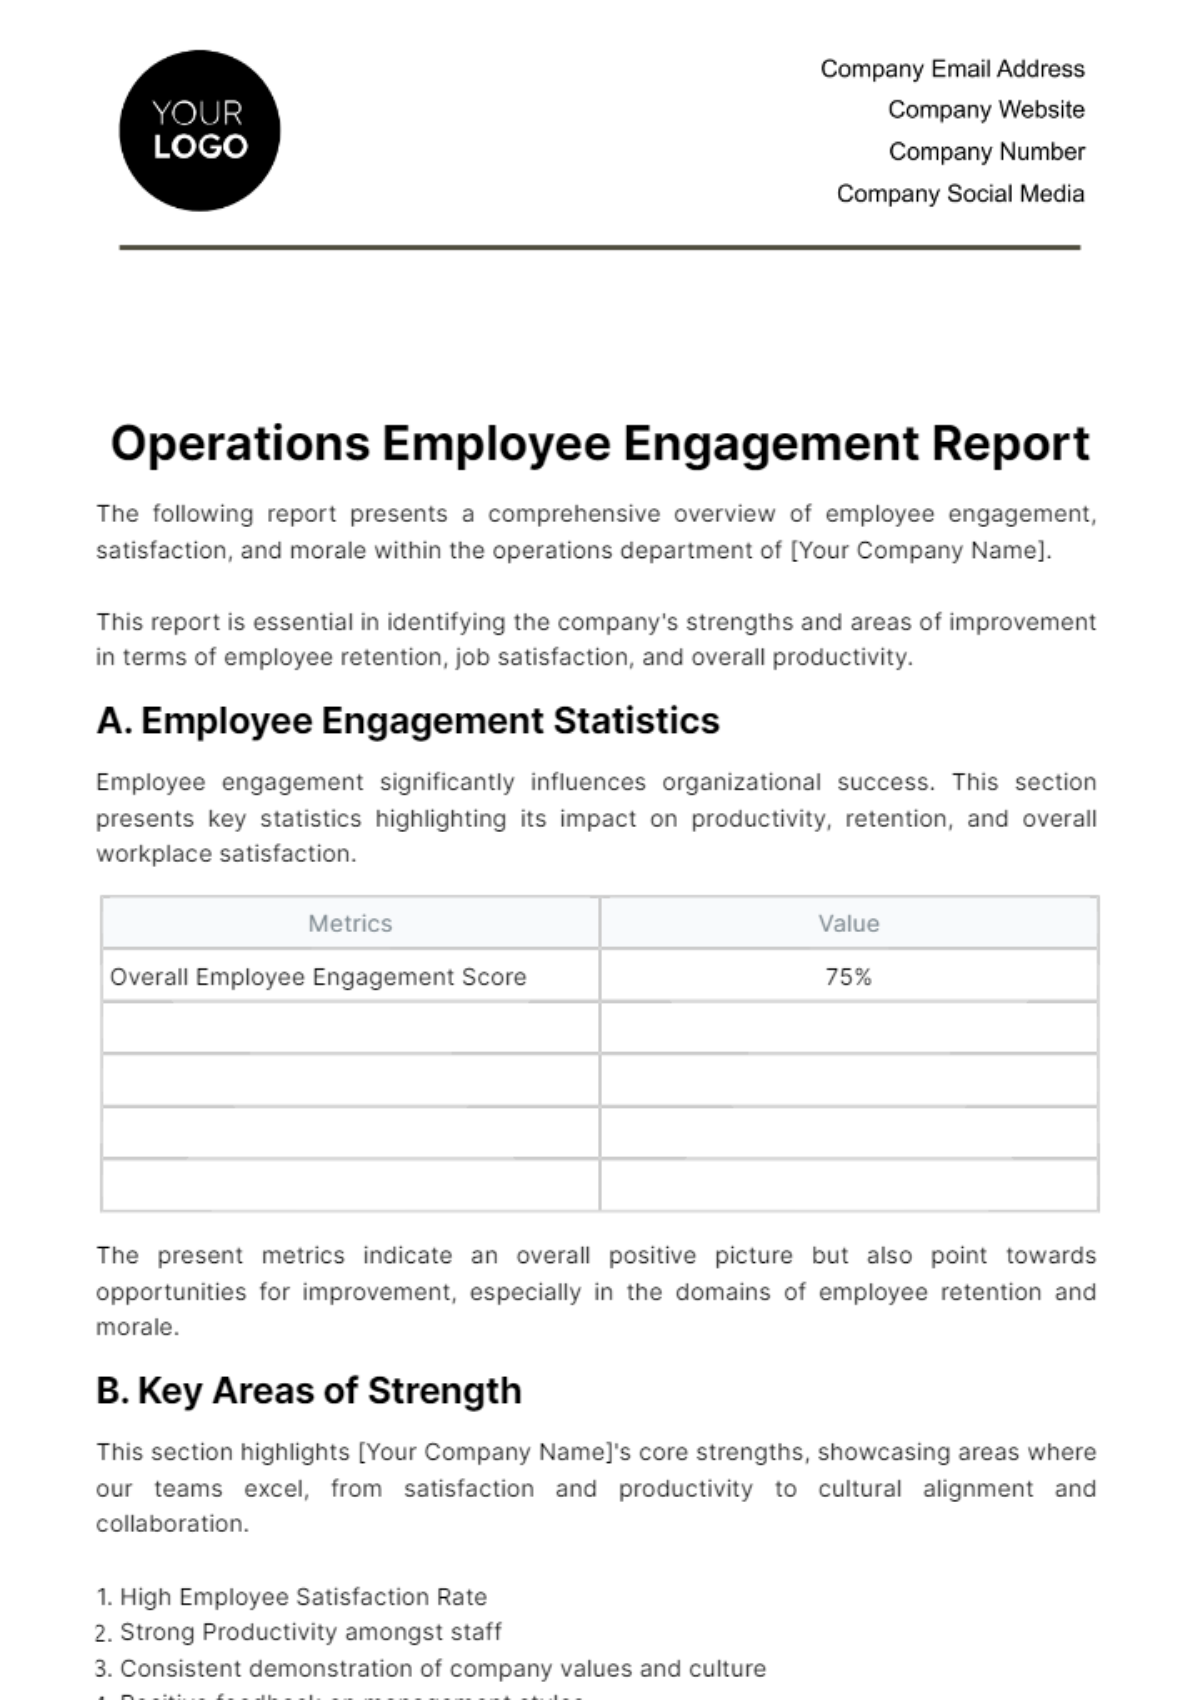 Free Operations Employee Engagement Report Template